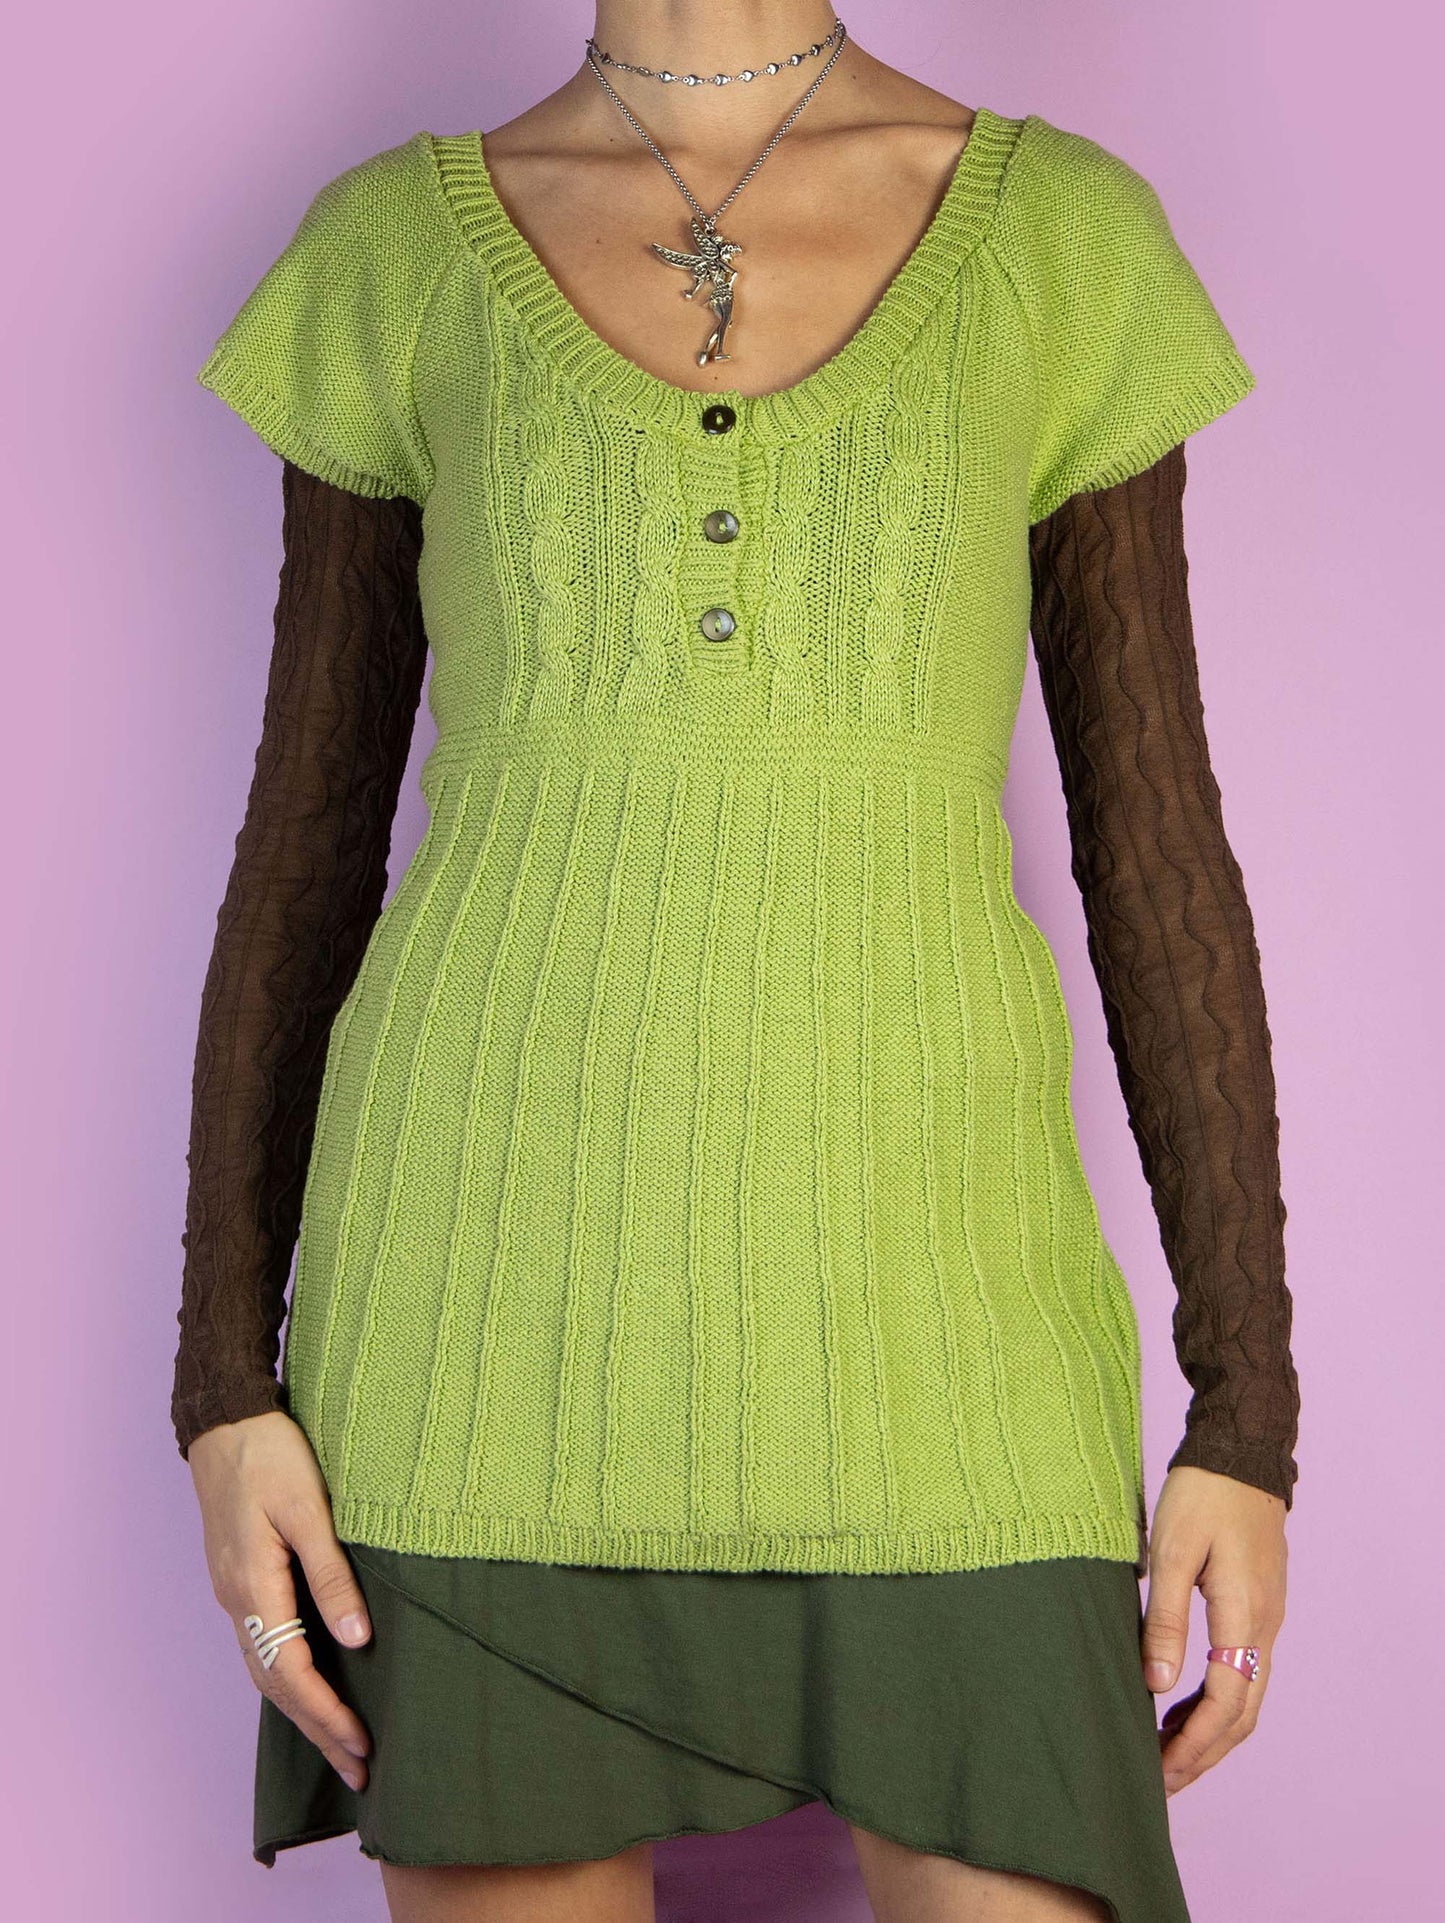 The Y2K Fairy Grunge Green Sweater is a vintage short-sleeved green jumper with a three-button detail. Cyber boho 2000s knitted pullover.